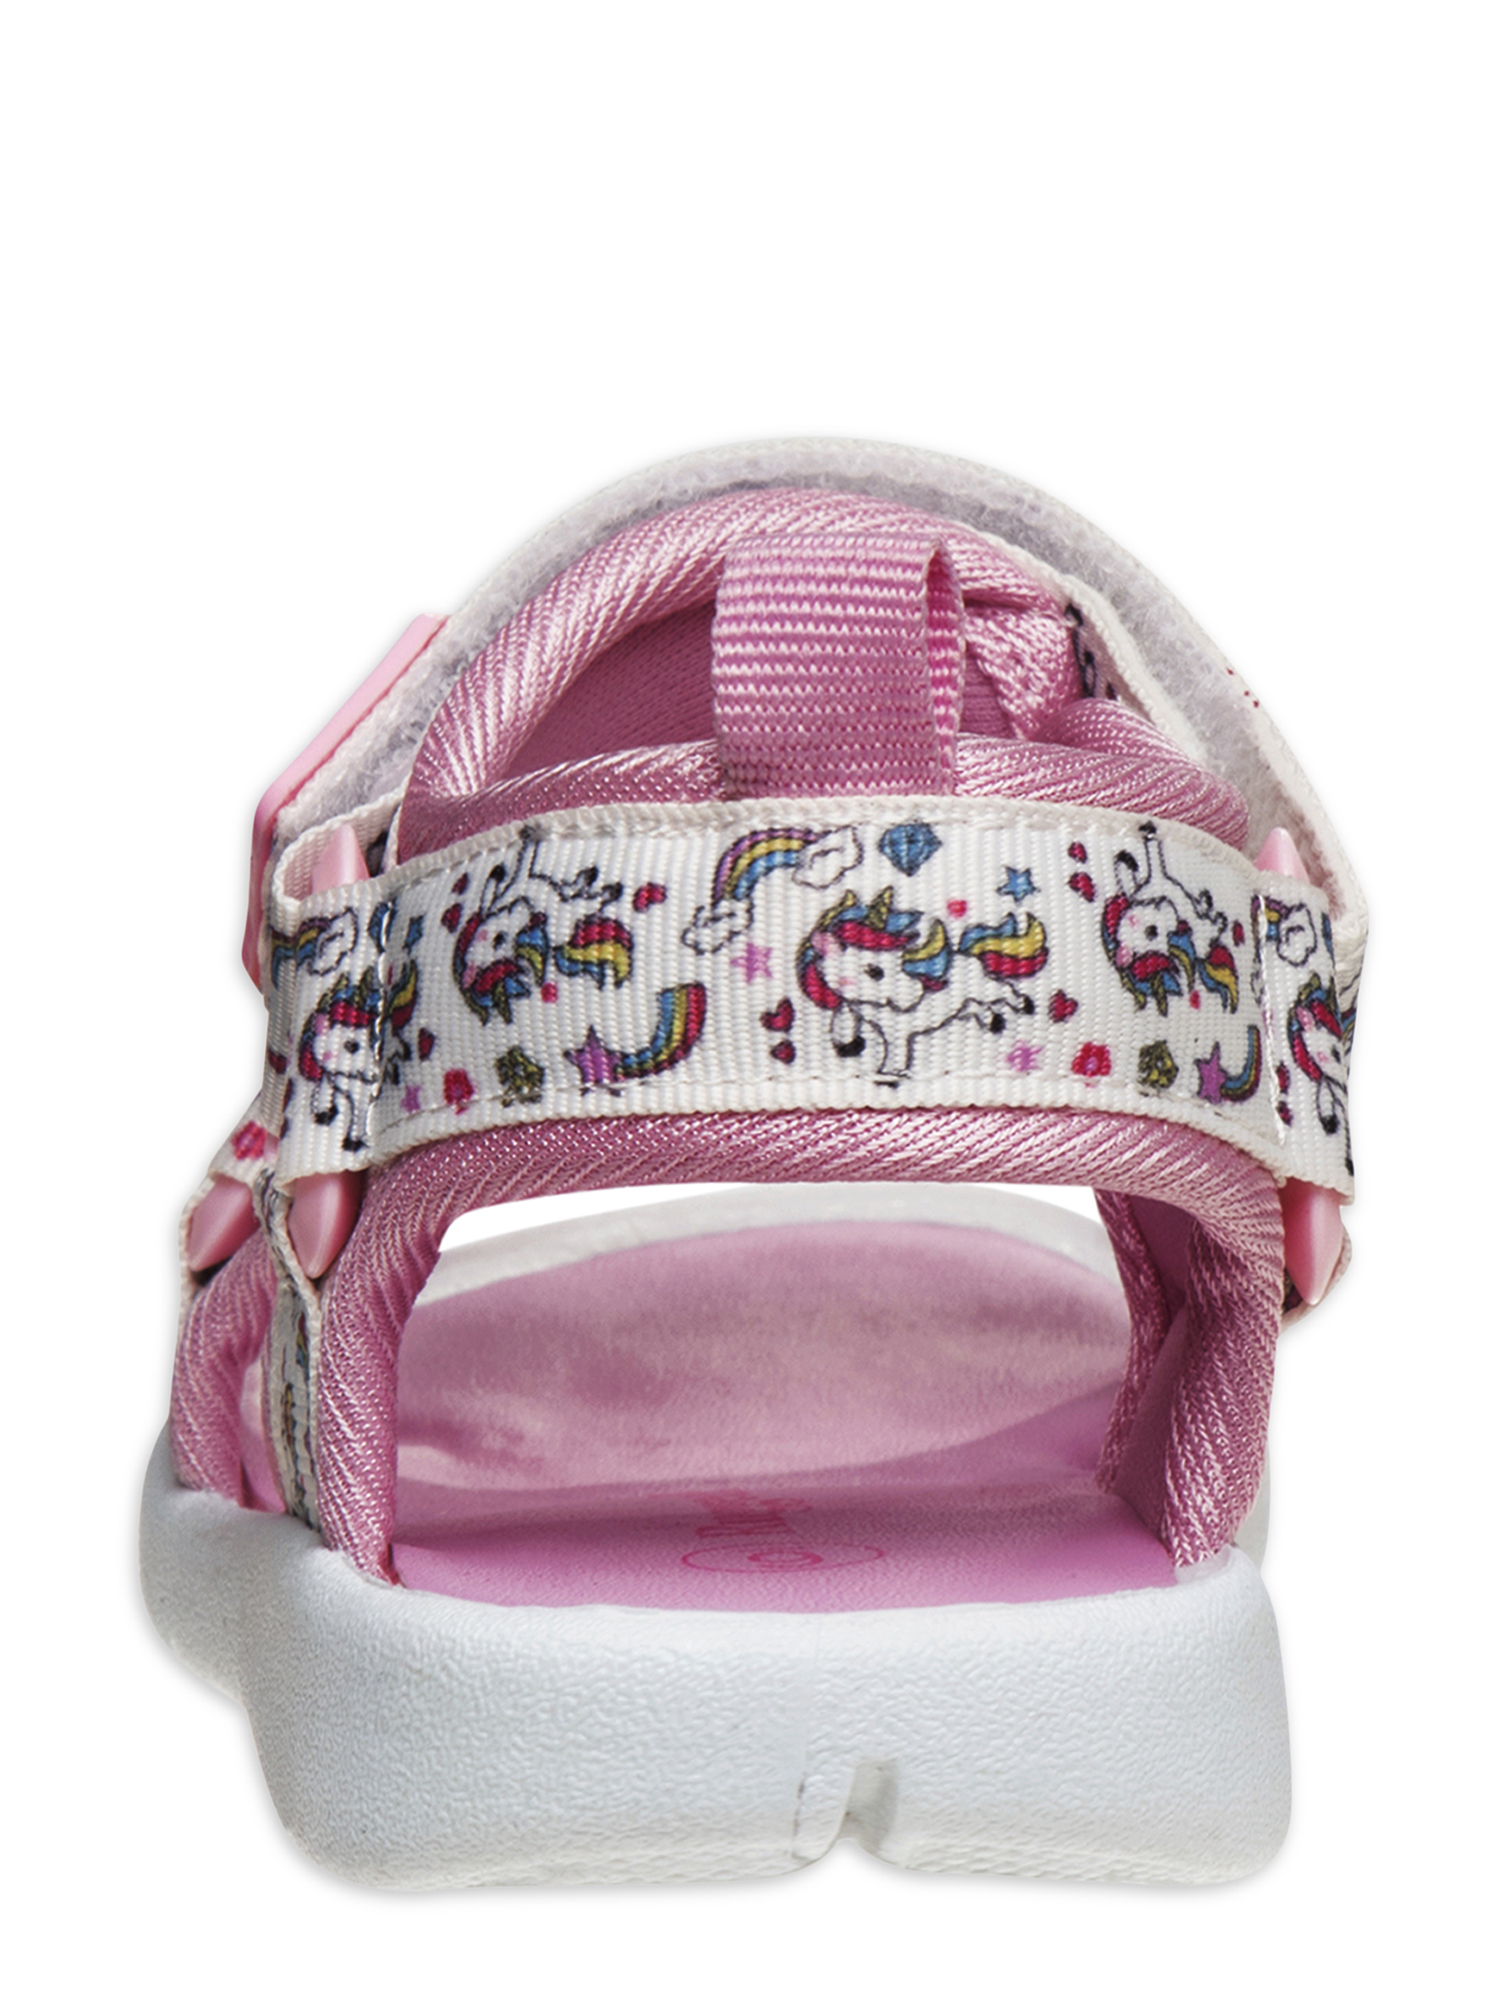 Rugged Bear Unicorn & Rainbows Two Strap Athletic Sandals (Toddler Girls) - image 4 of 5